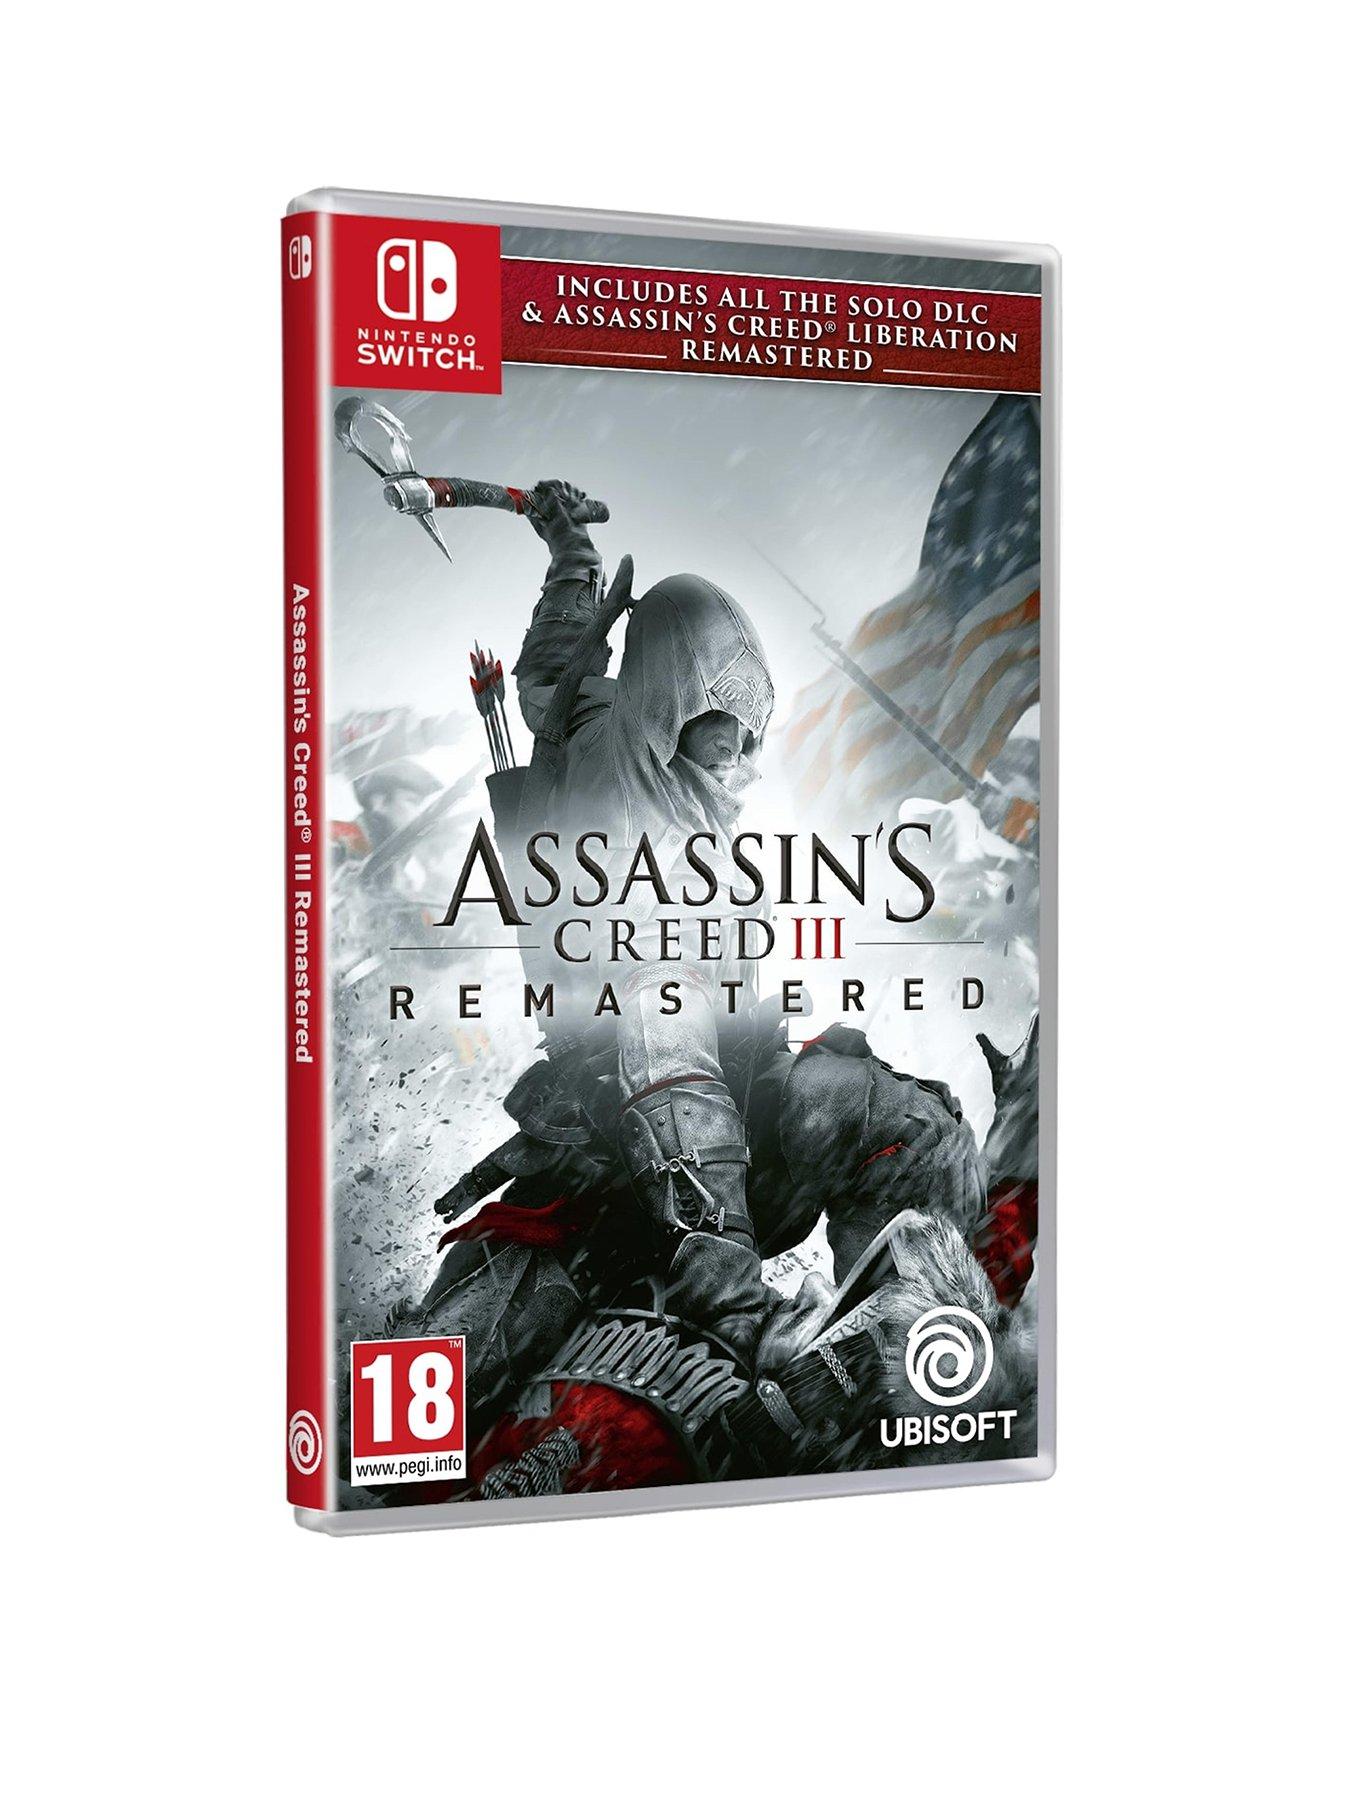 what assassin's creed games are on switch